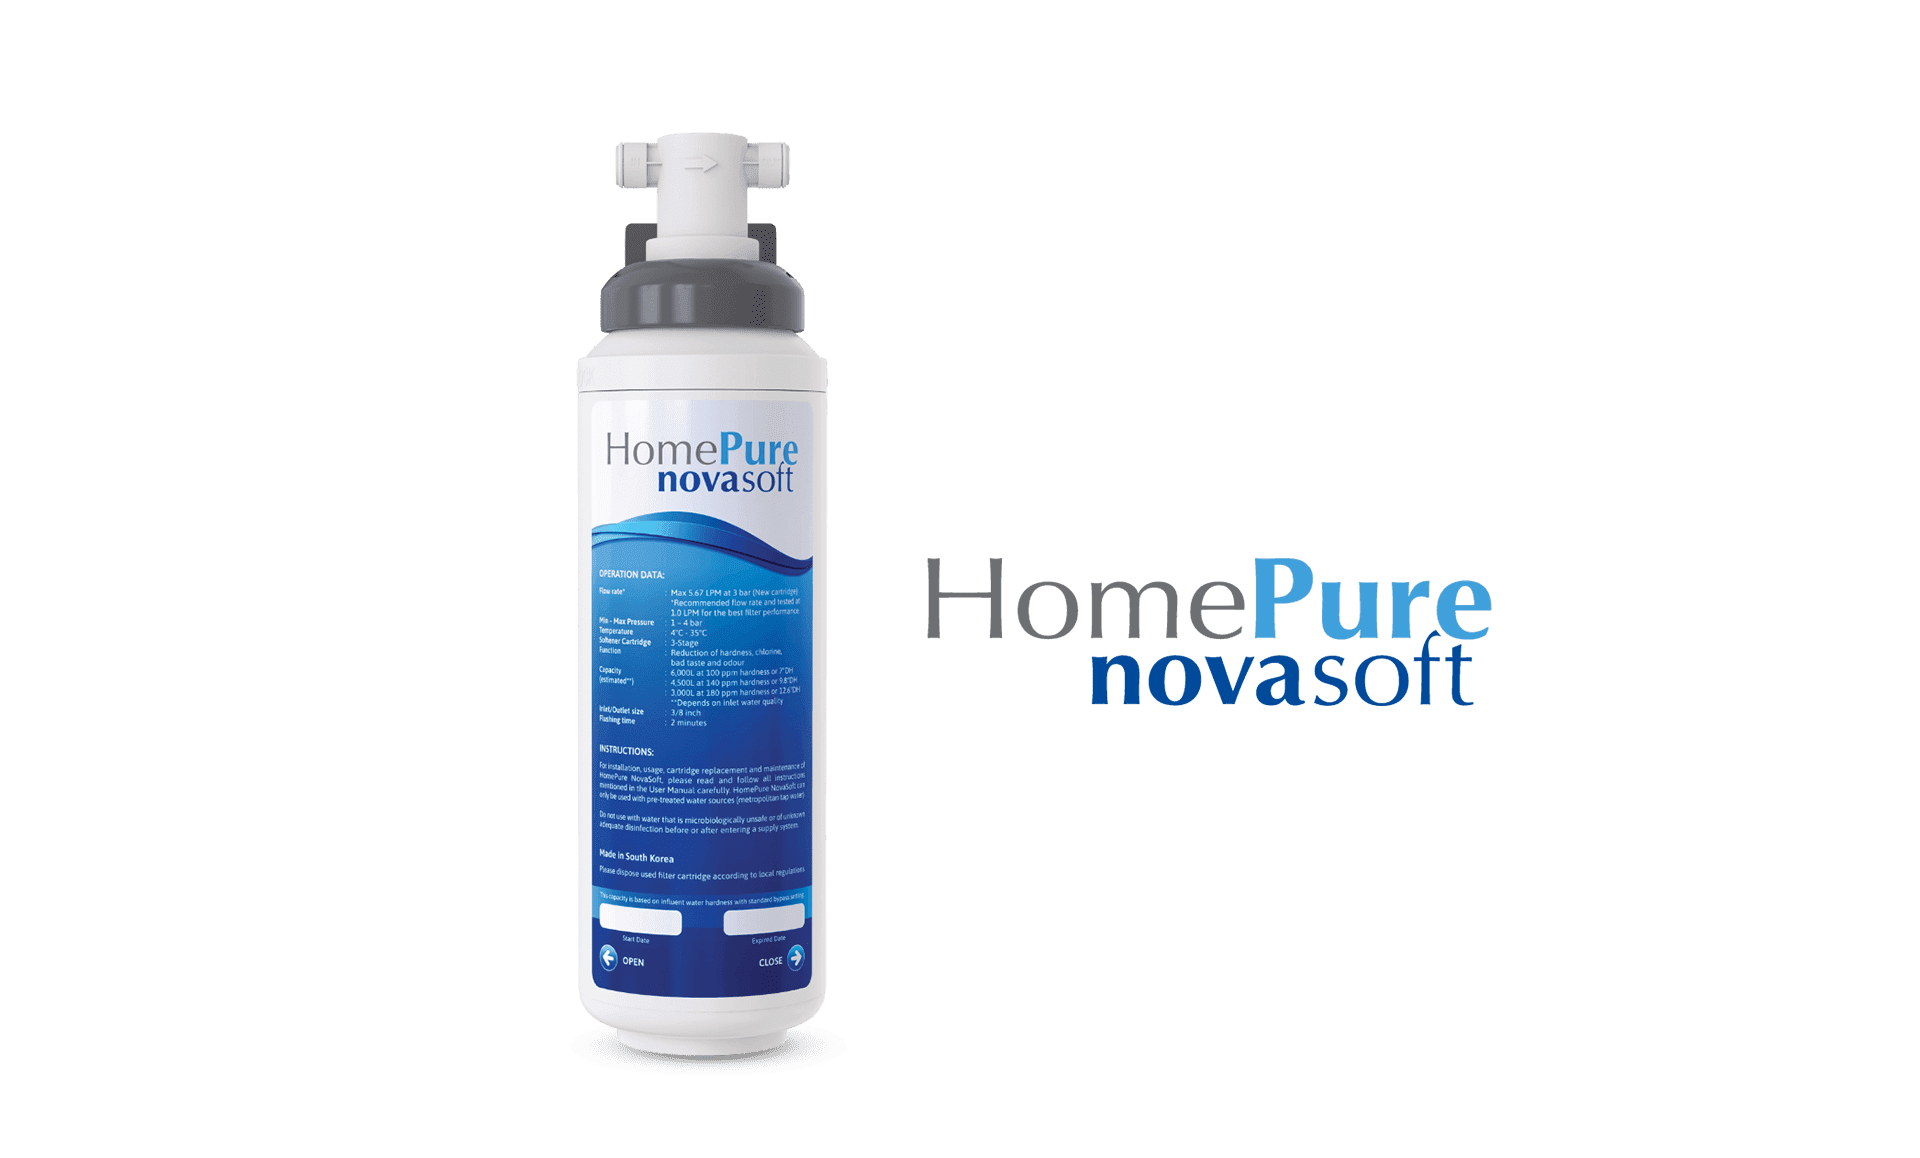 HomePure NovaSoft reduces the hardness of water